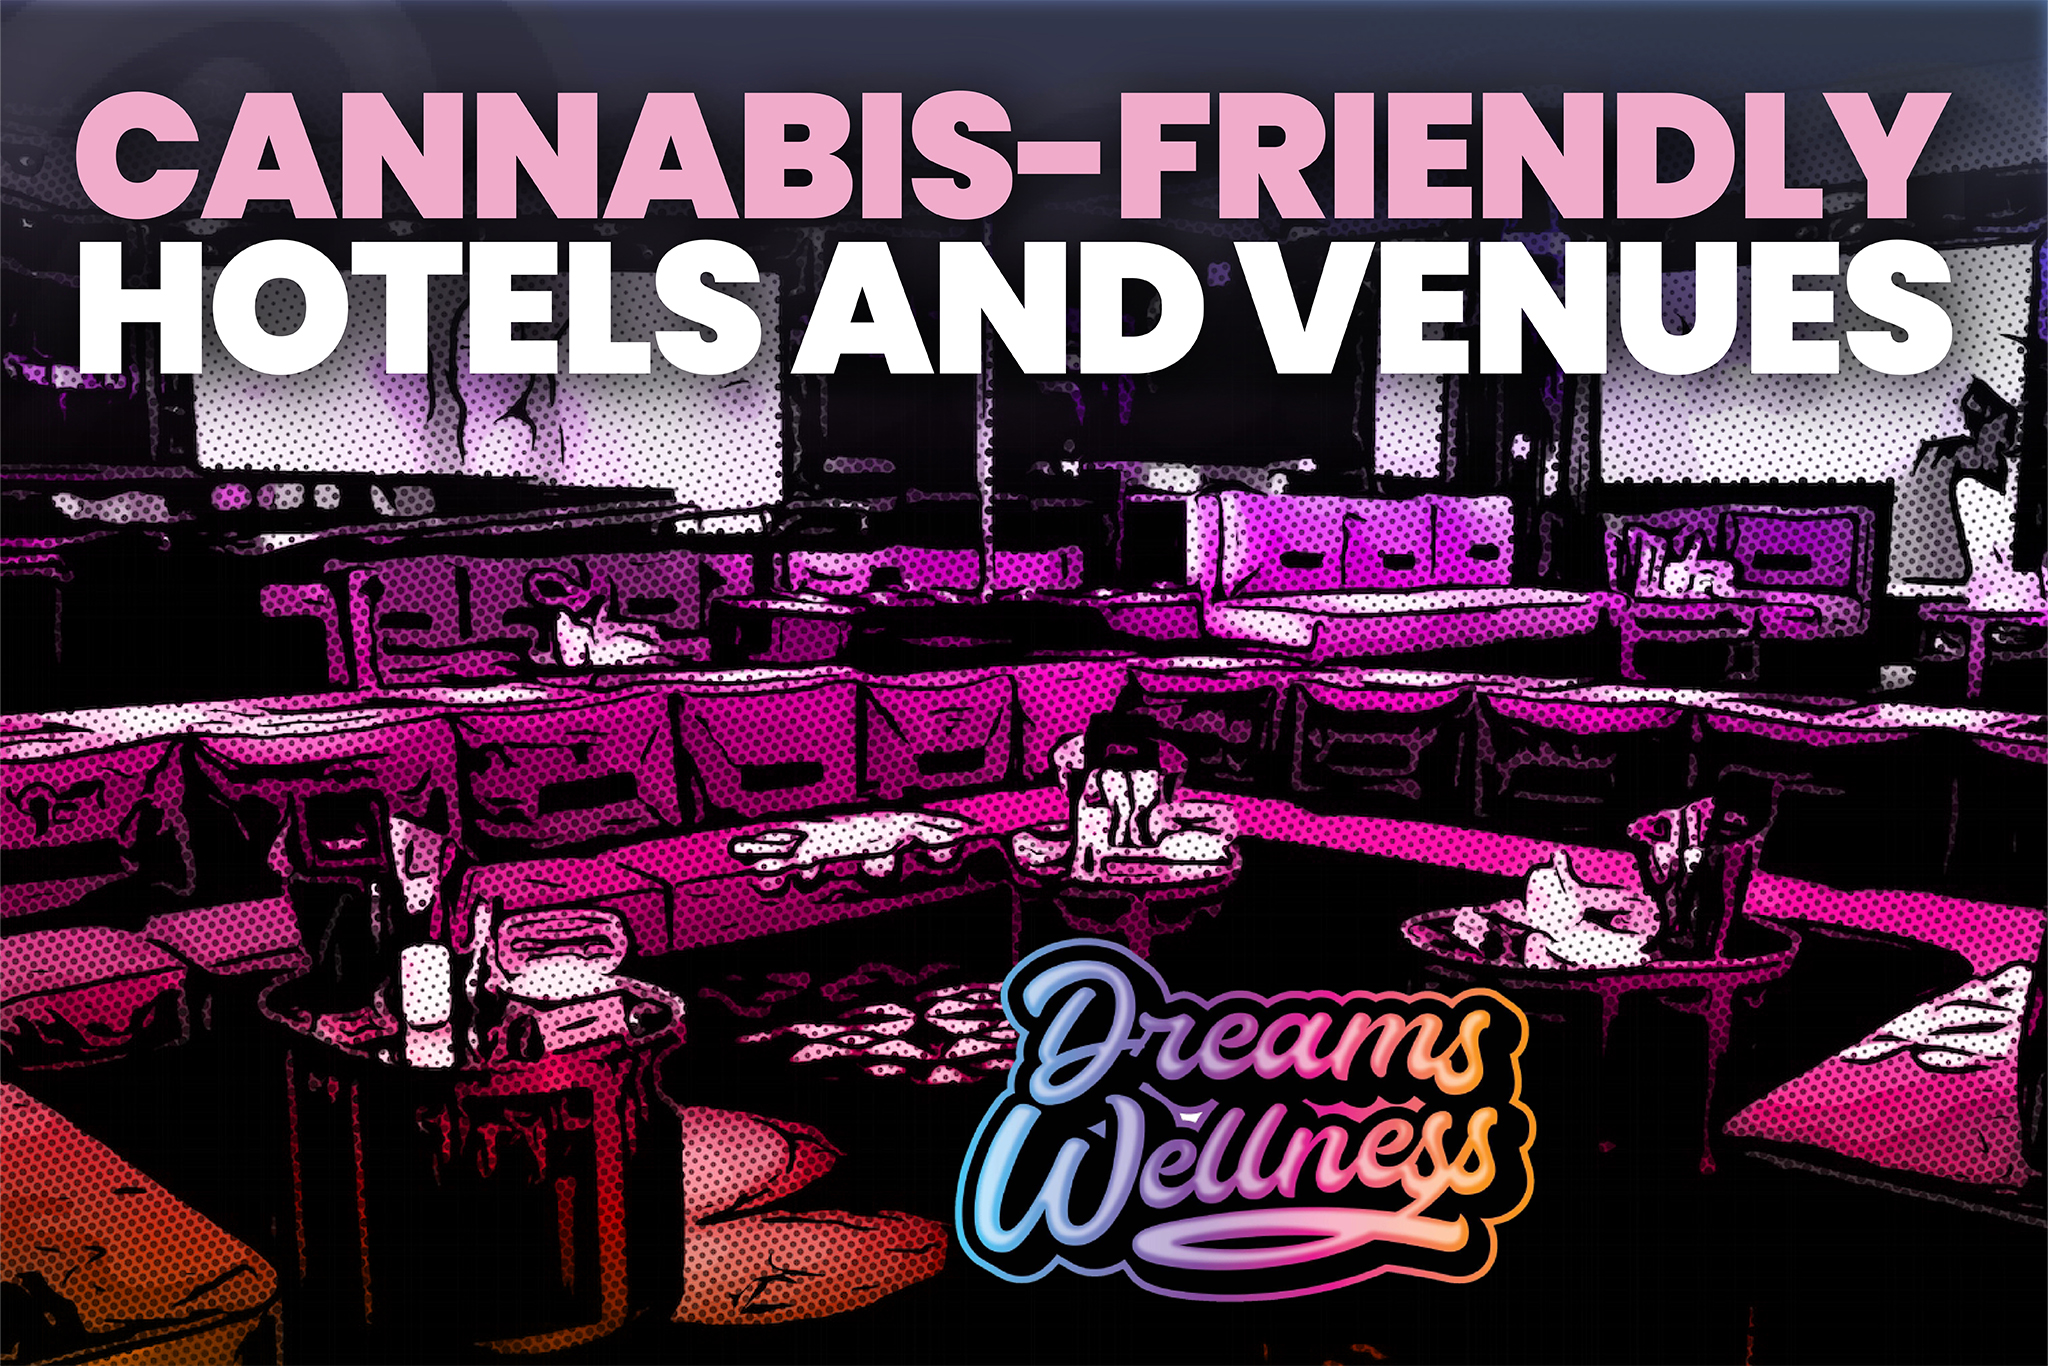 Cannabis-Friendly Venues And Hotels